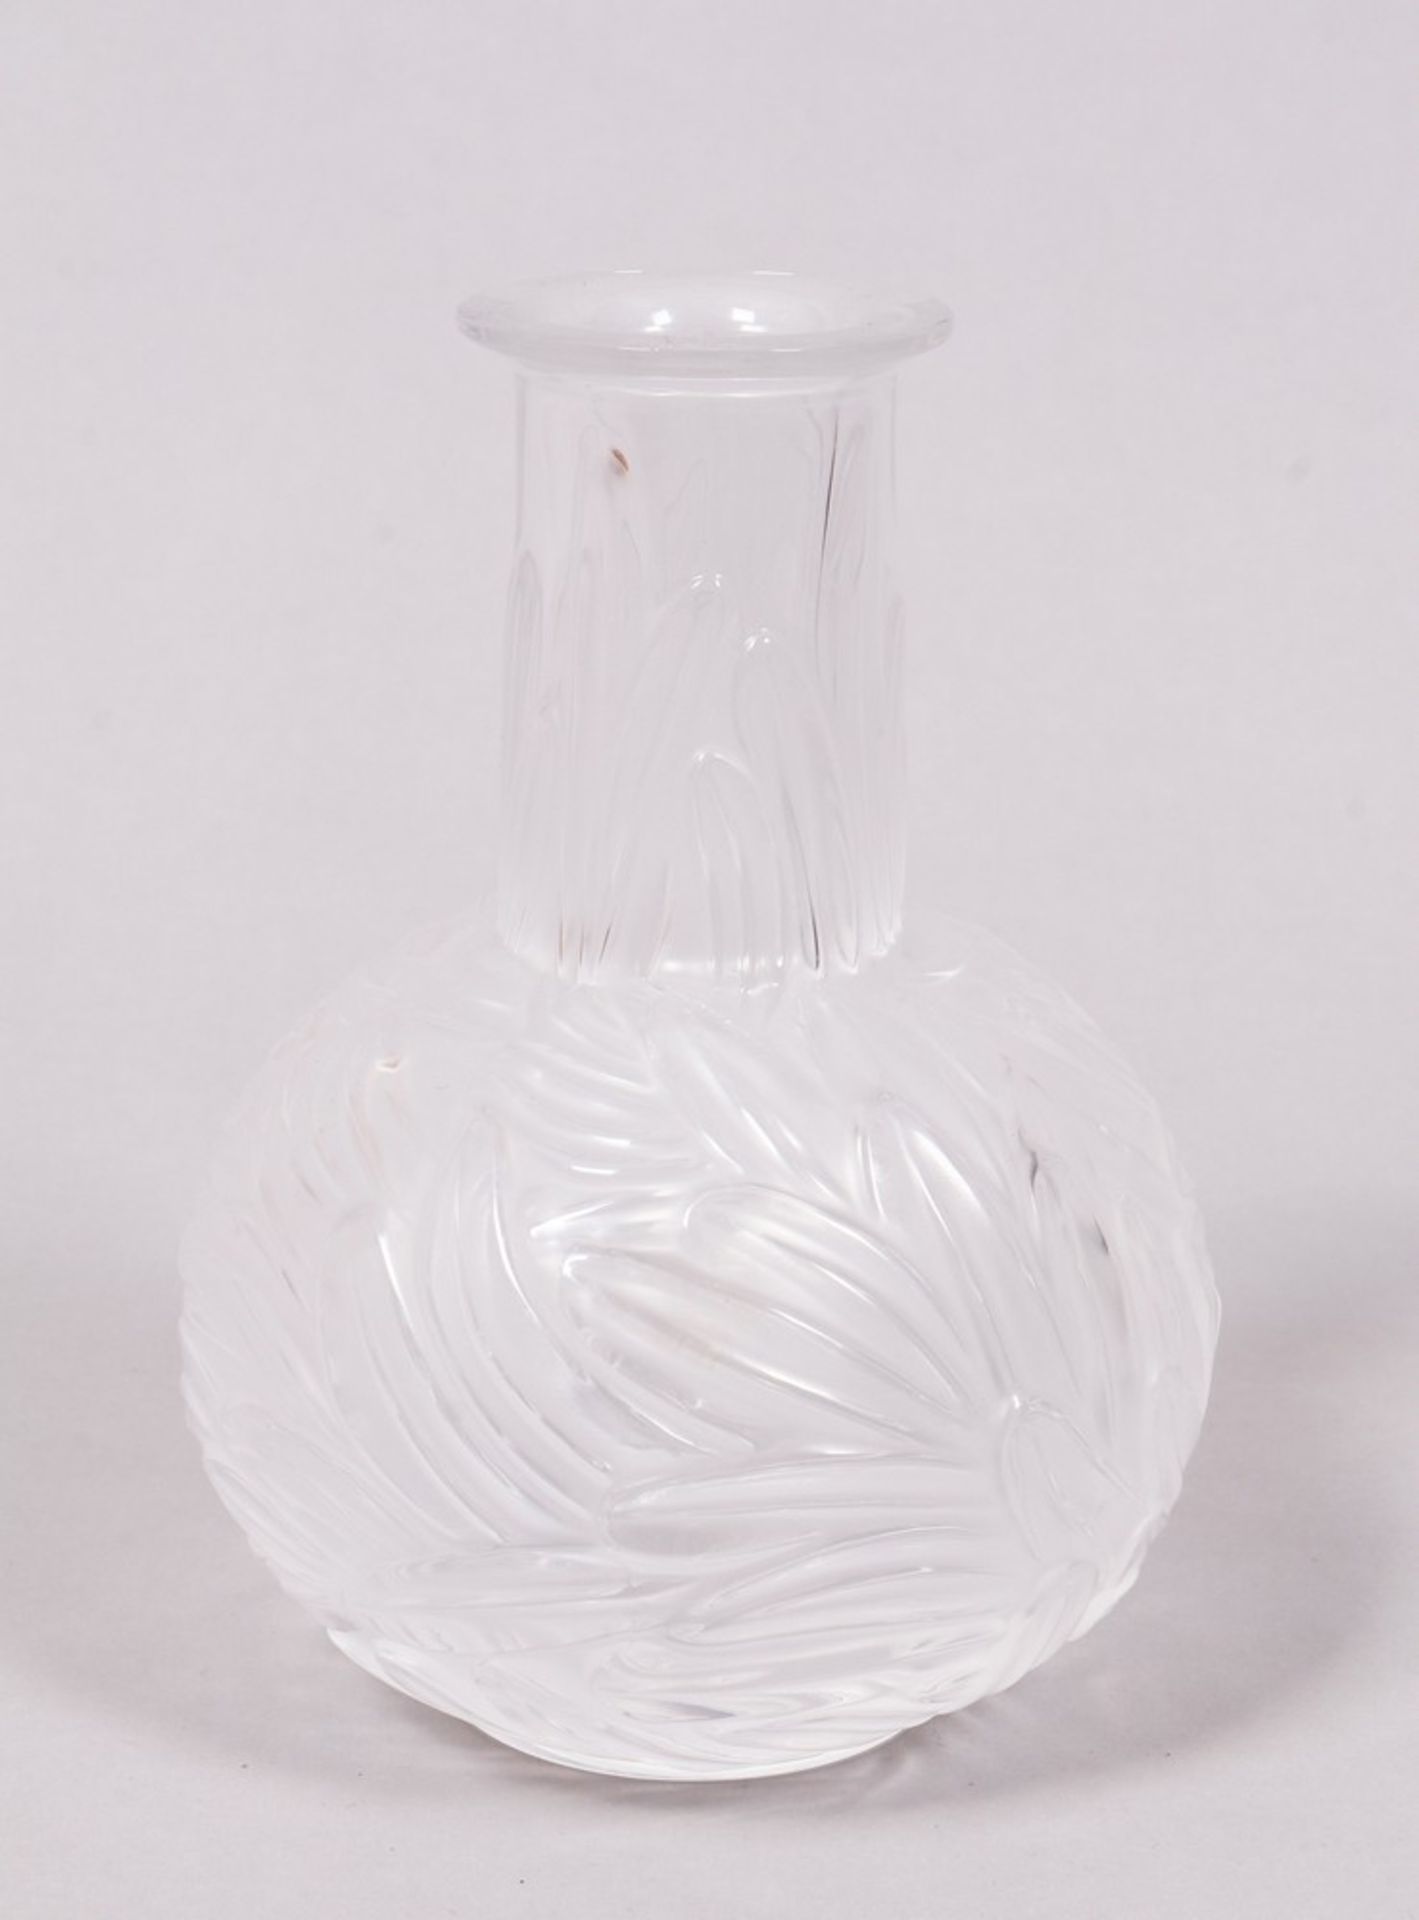 Small vase, Lalique, France, 20th C.